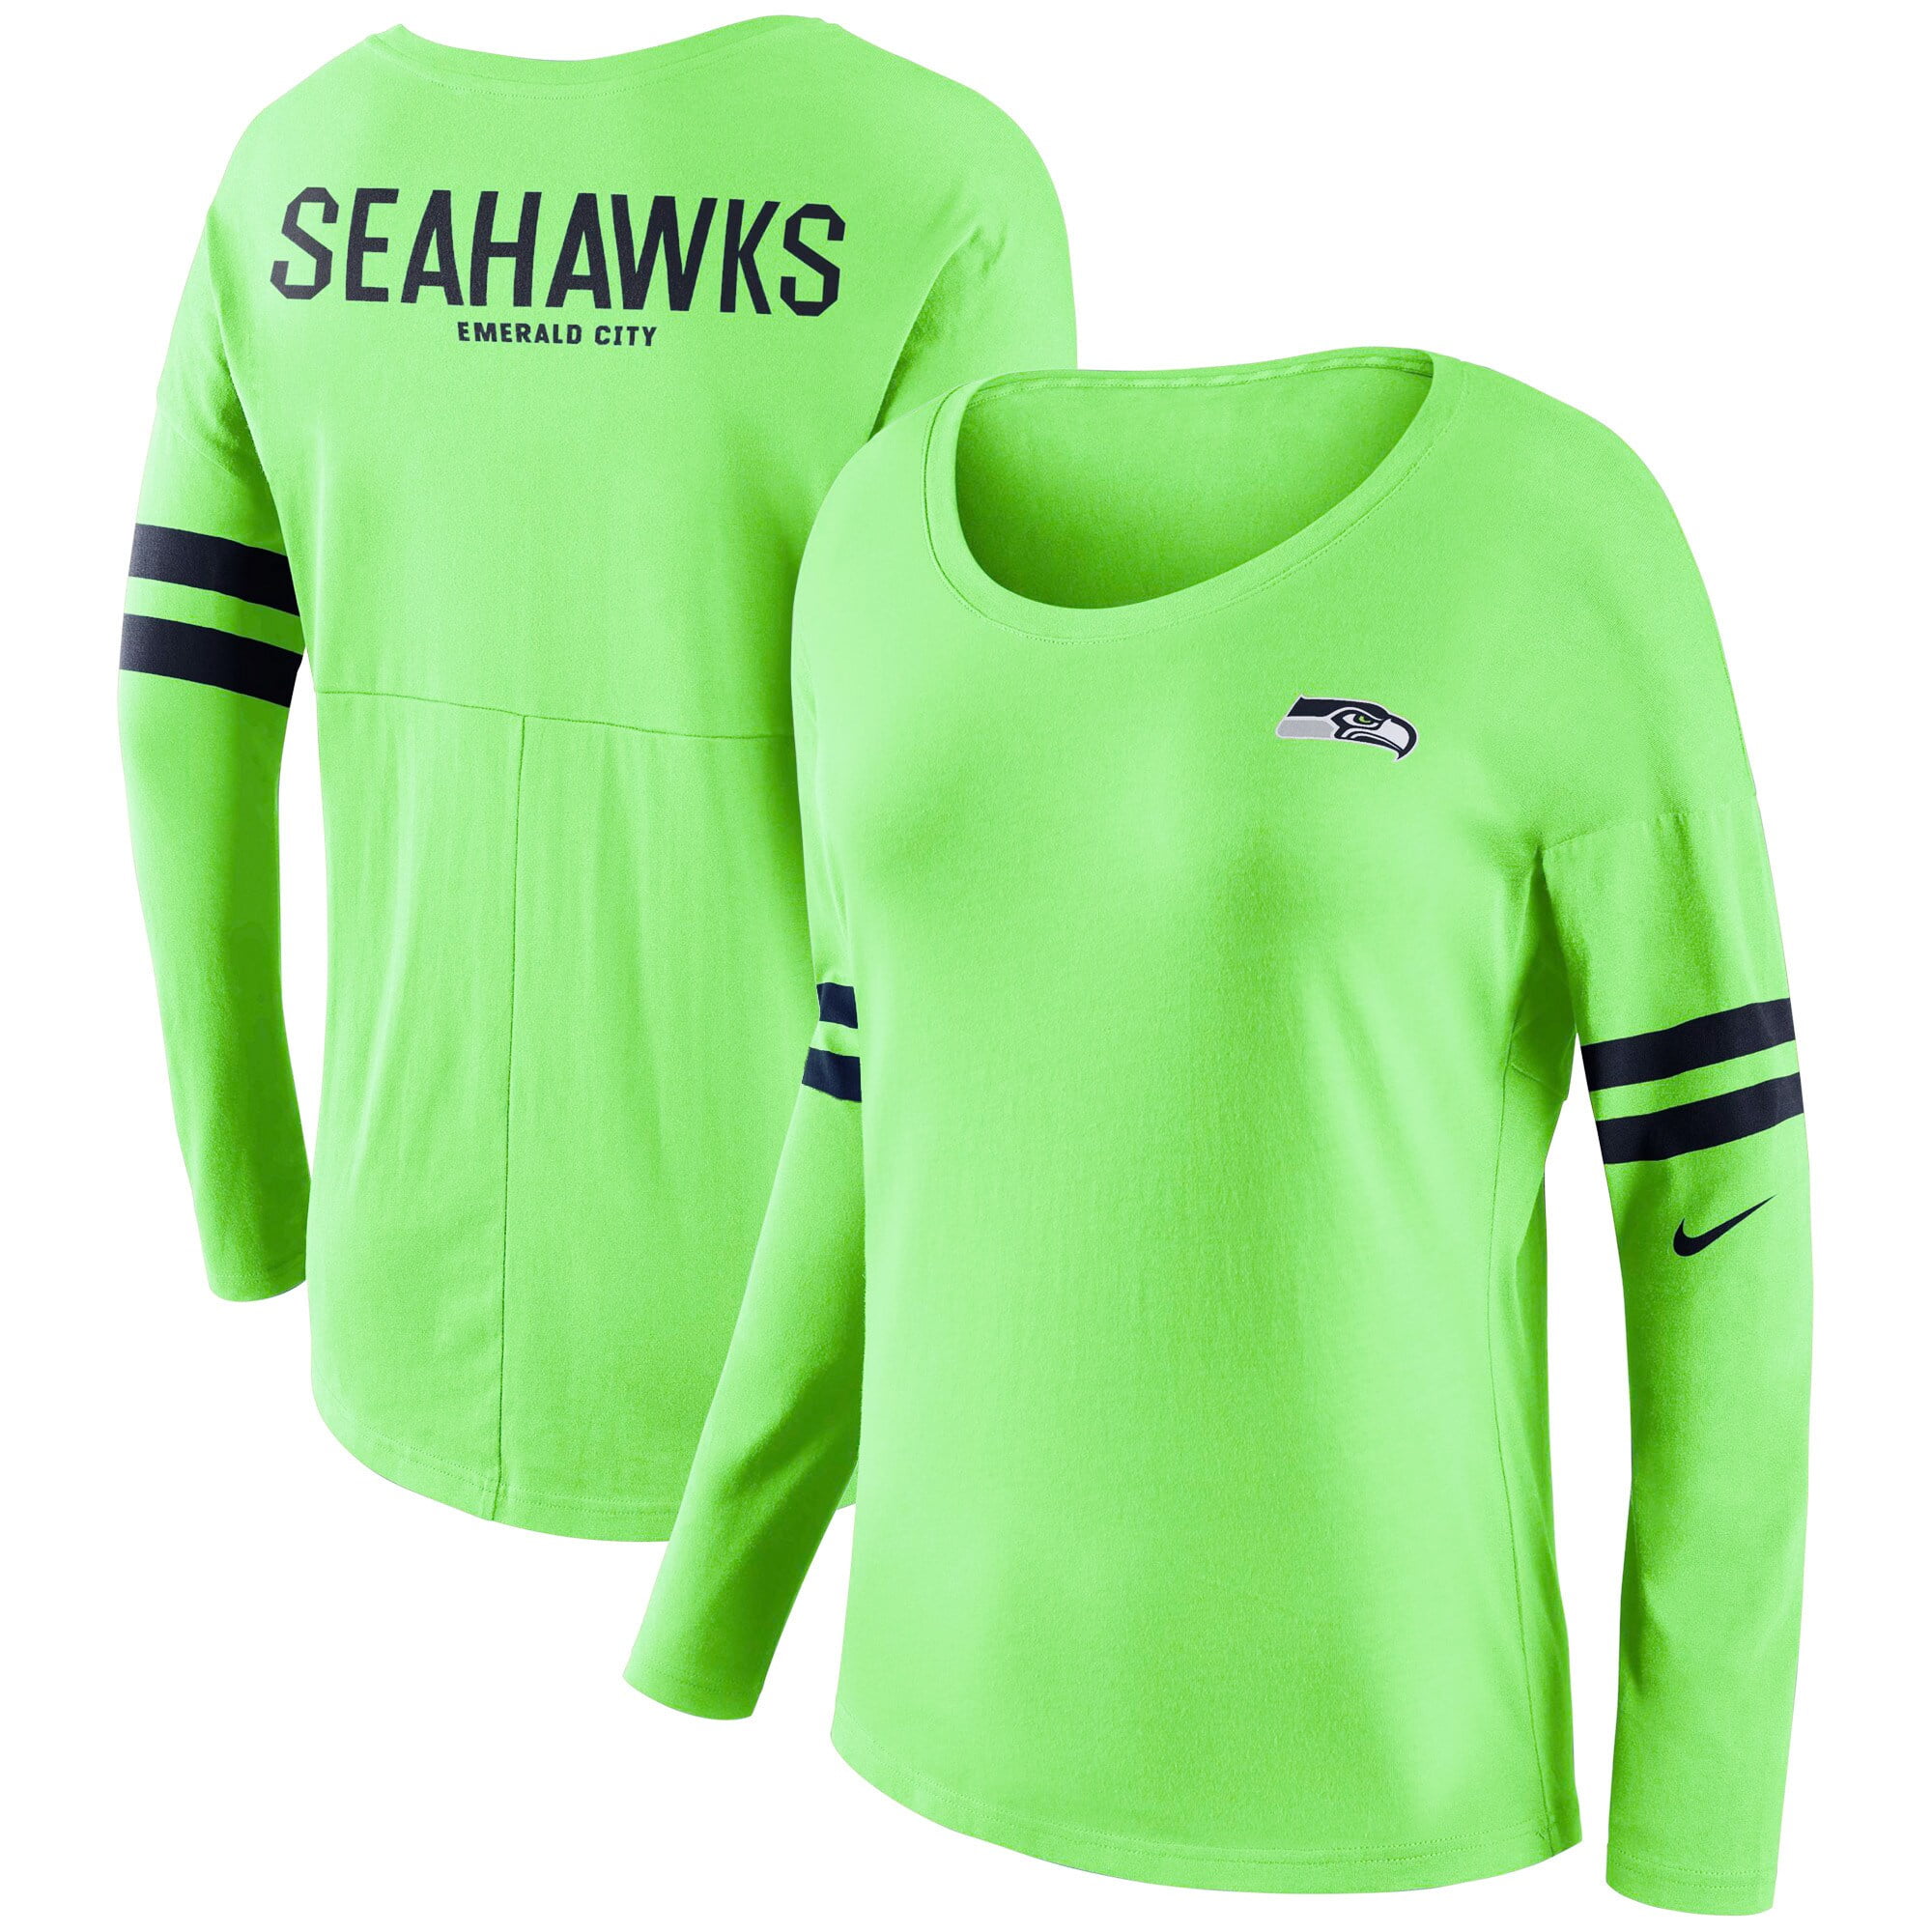 seahawks action green jersey womens